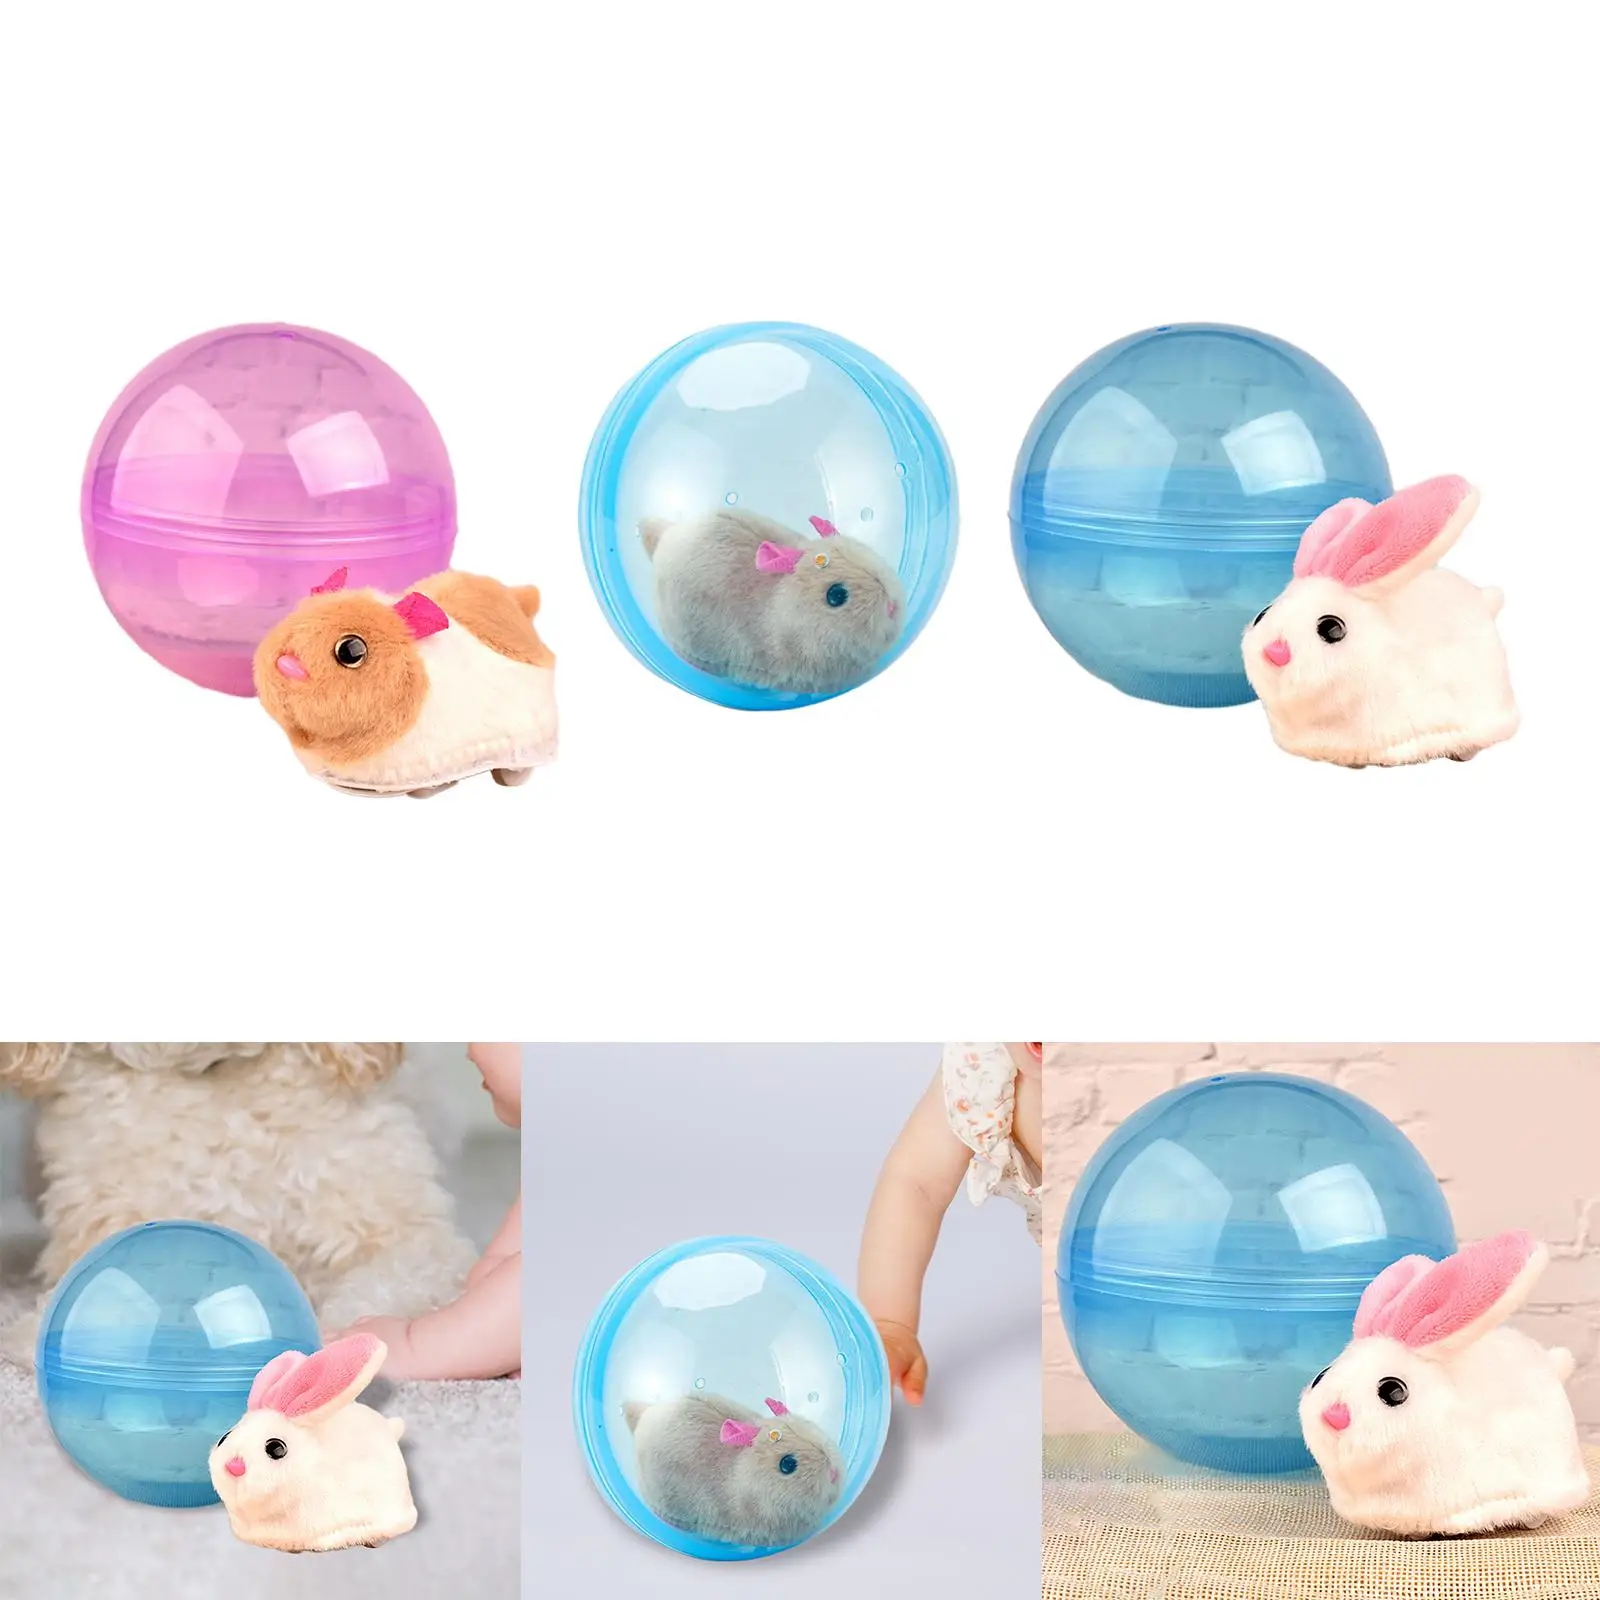 Electric Ball Toys Interactive Learning Walking Indoor Outdoor Playset Developmental Play Fun for Kids Boys Girls Holiday Gifts